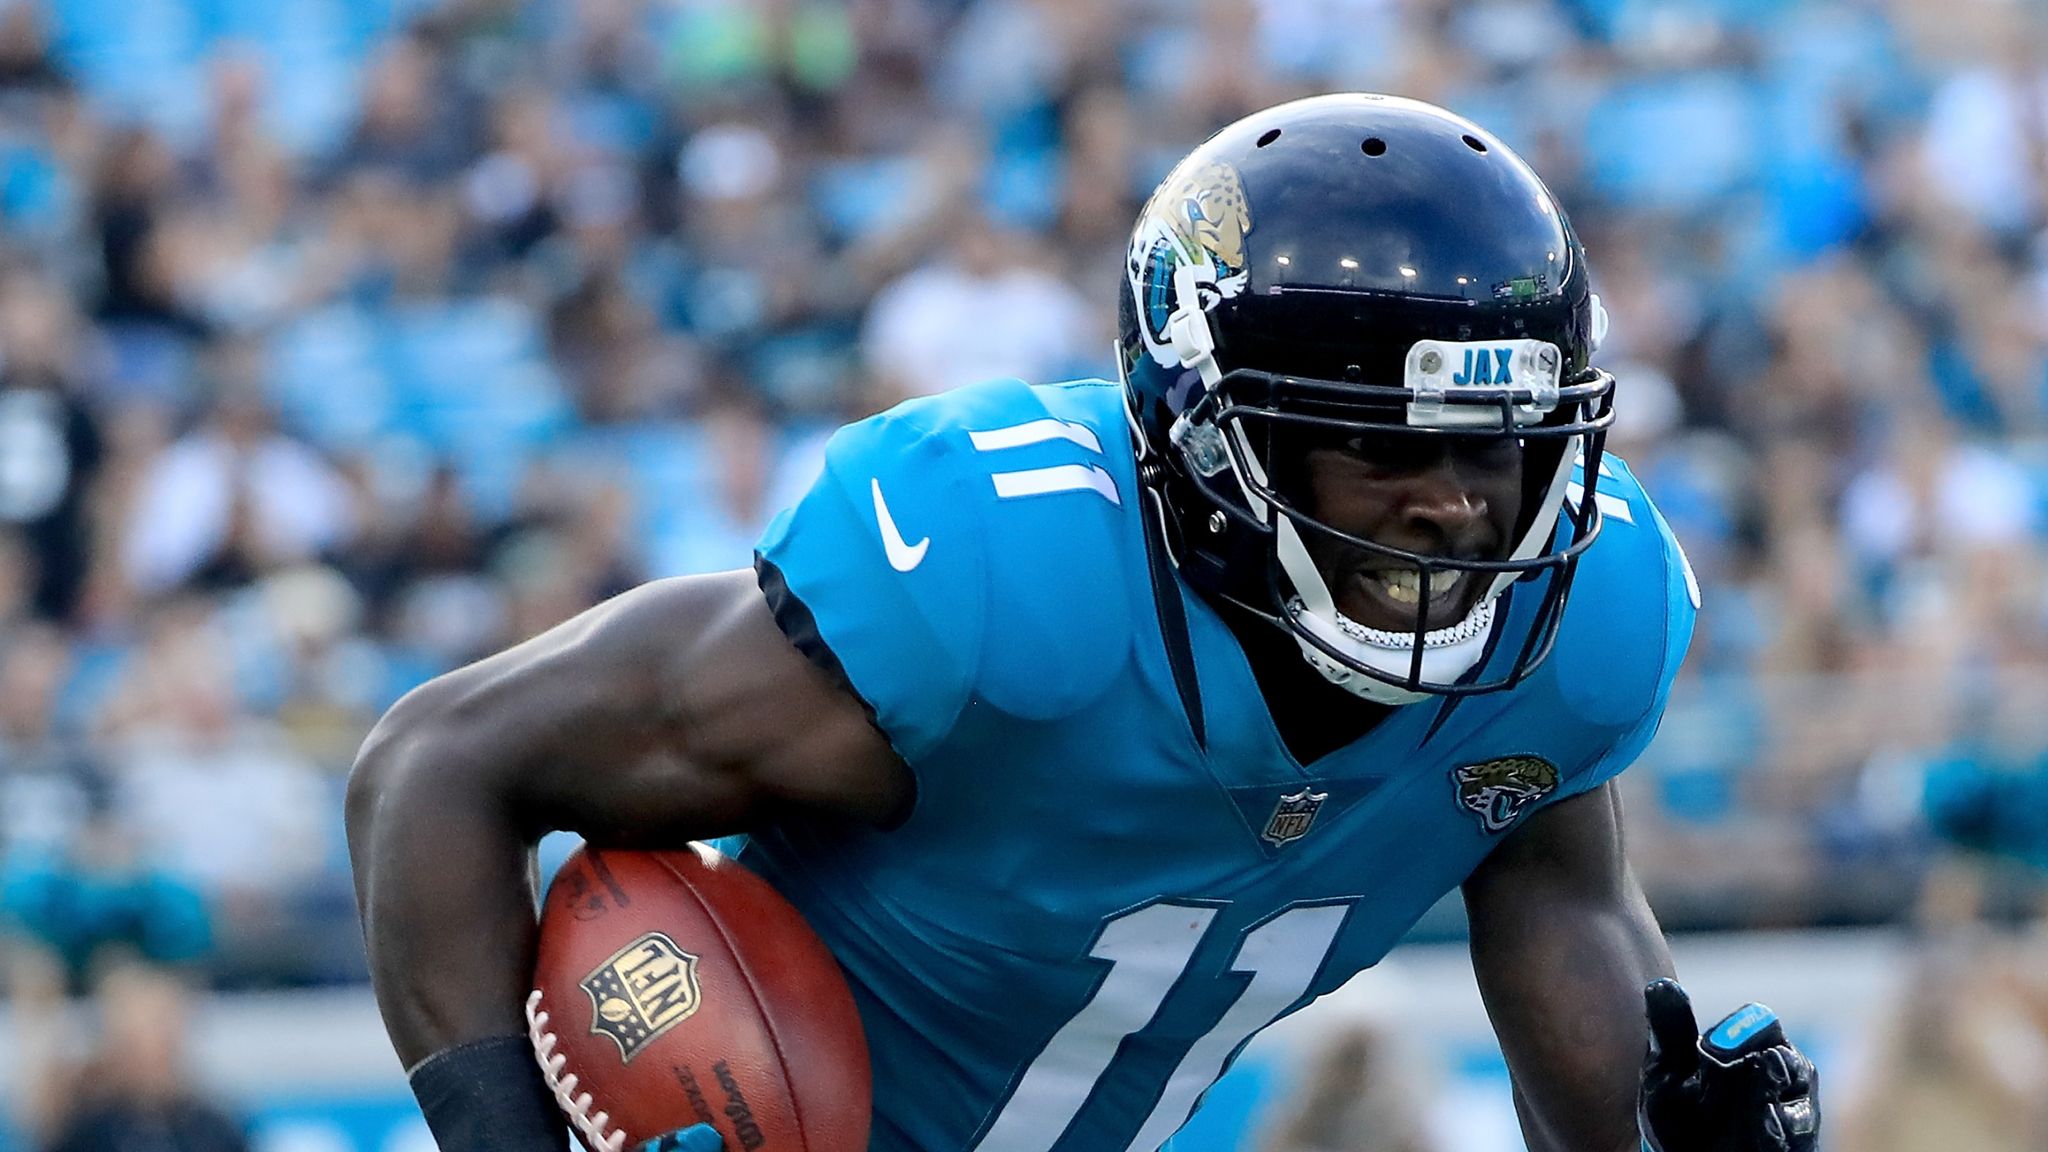 Jacksonville Jaguars wide receiver Marqise Lee to miss entire 2018 season |  NFL News | Sky Sports